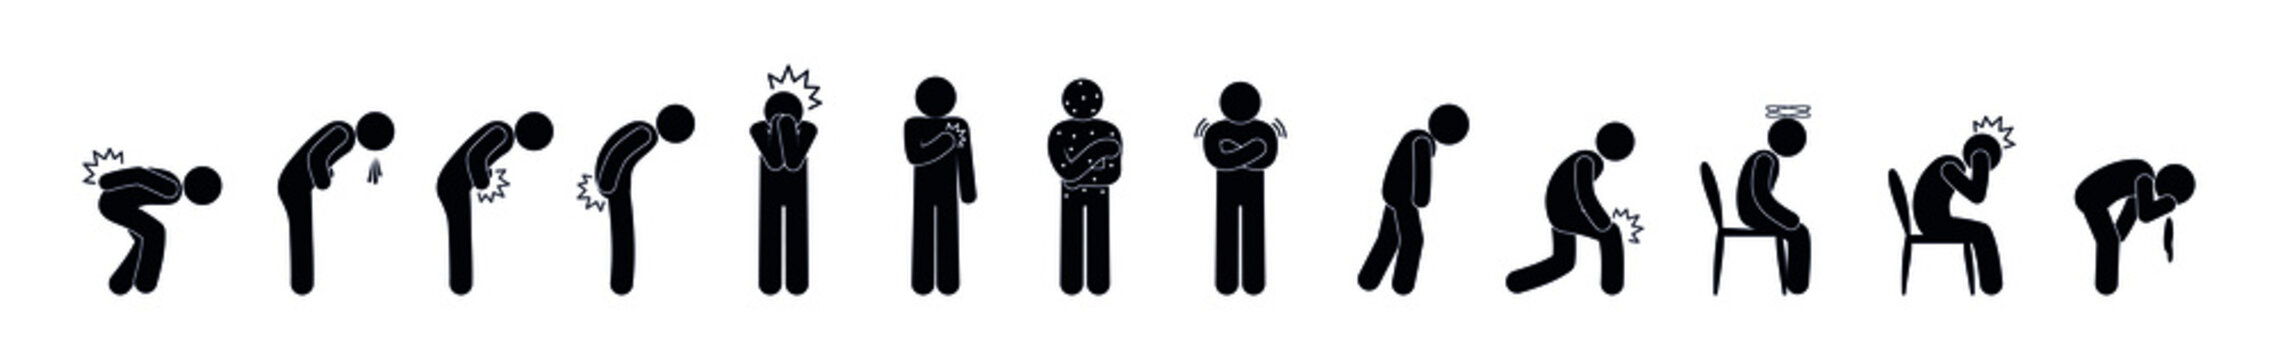 Symptoms of human diseases. People are sick, in pain. Stick figure icon man. Illustration of feeling unwell.